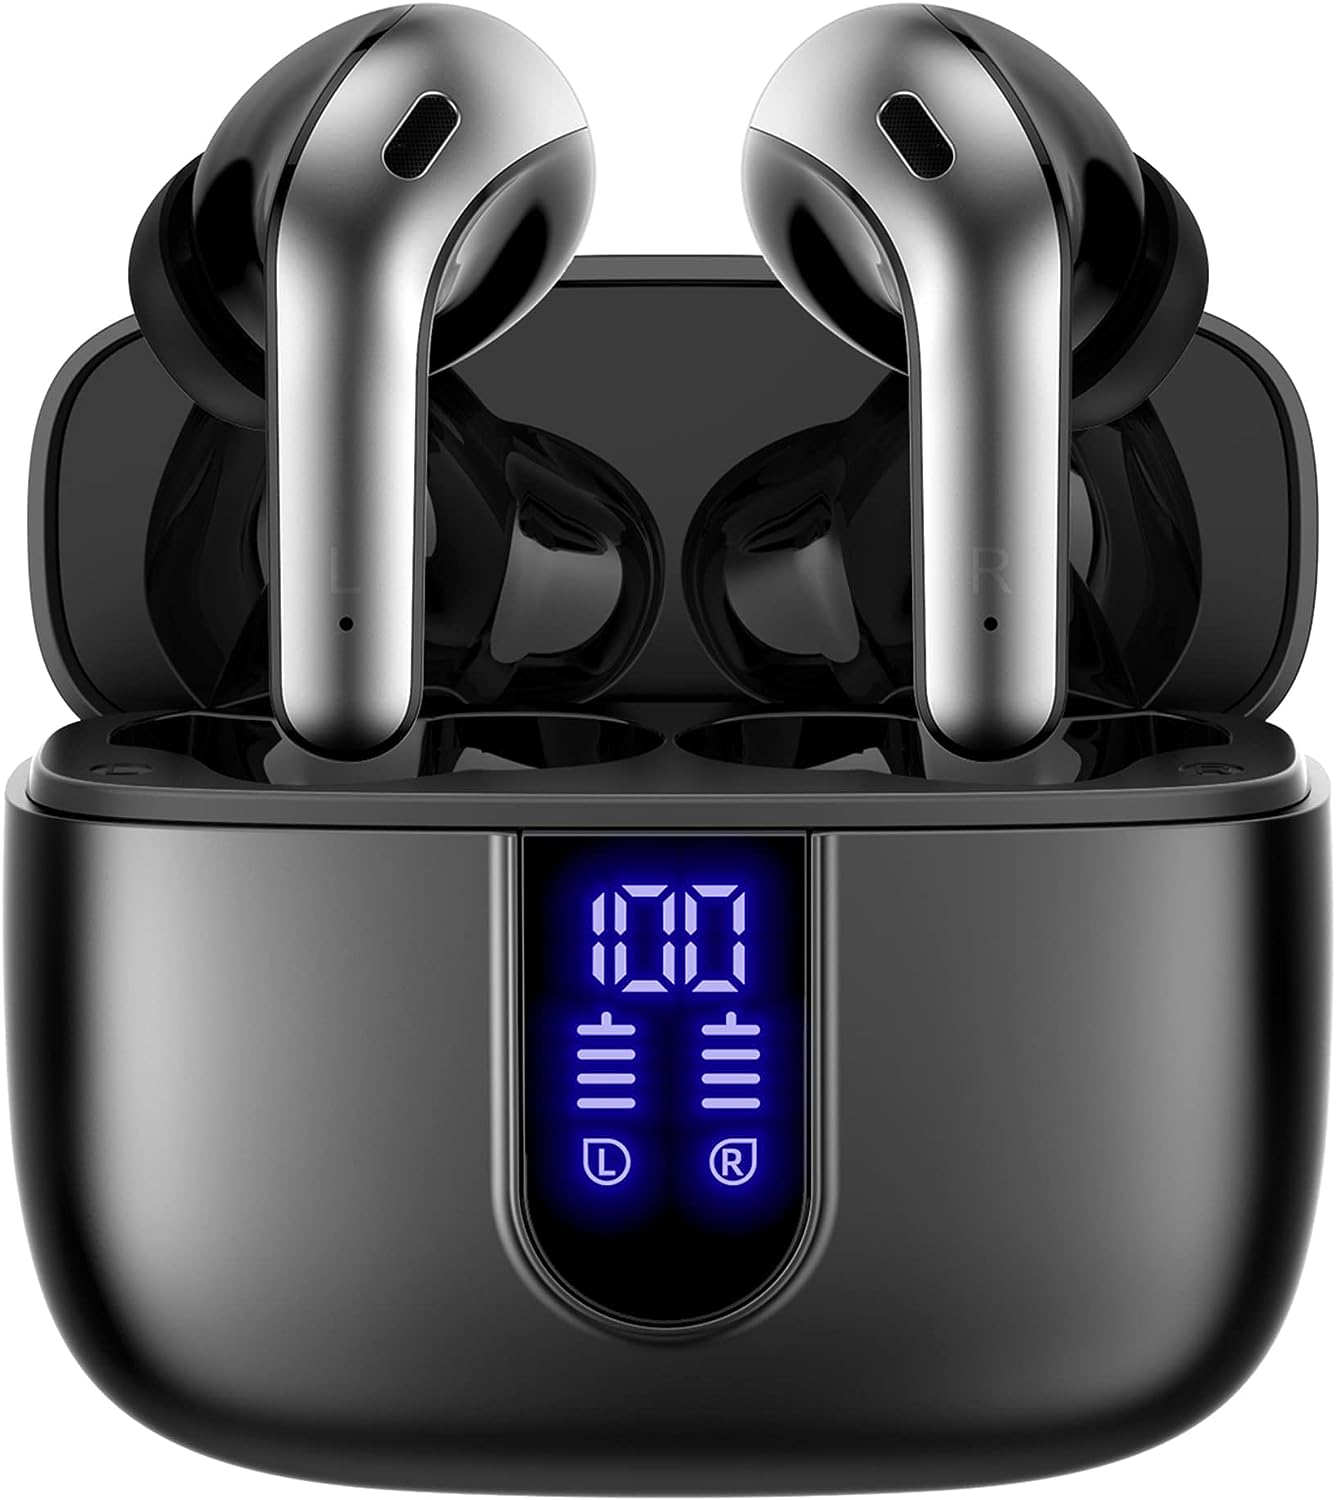 wireless earbuds portable music pleasure top 10 christmas gift ideas for 21-year-old female